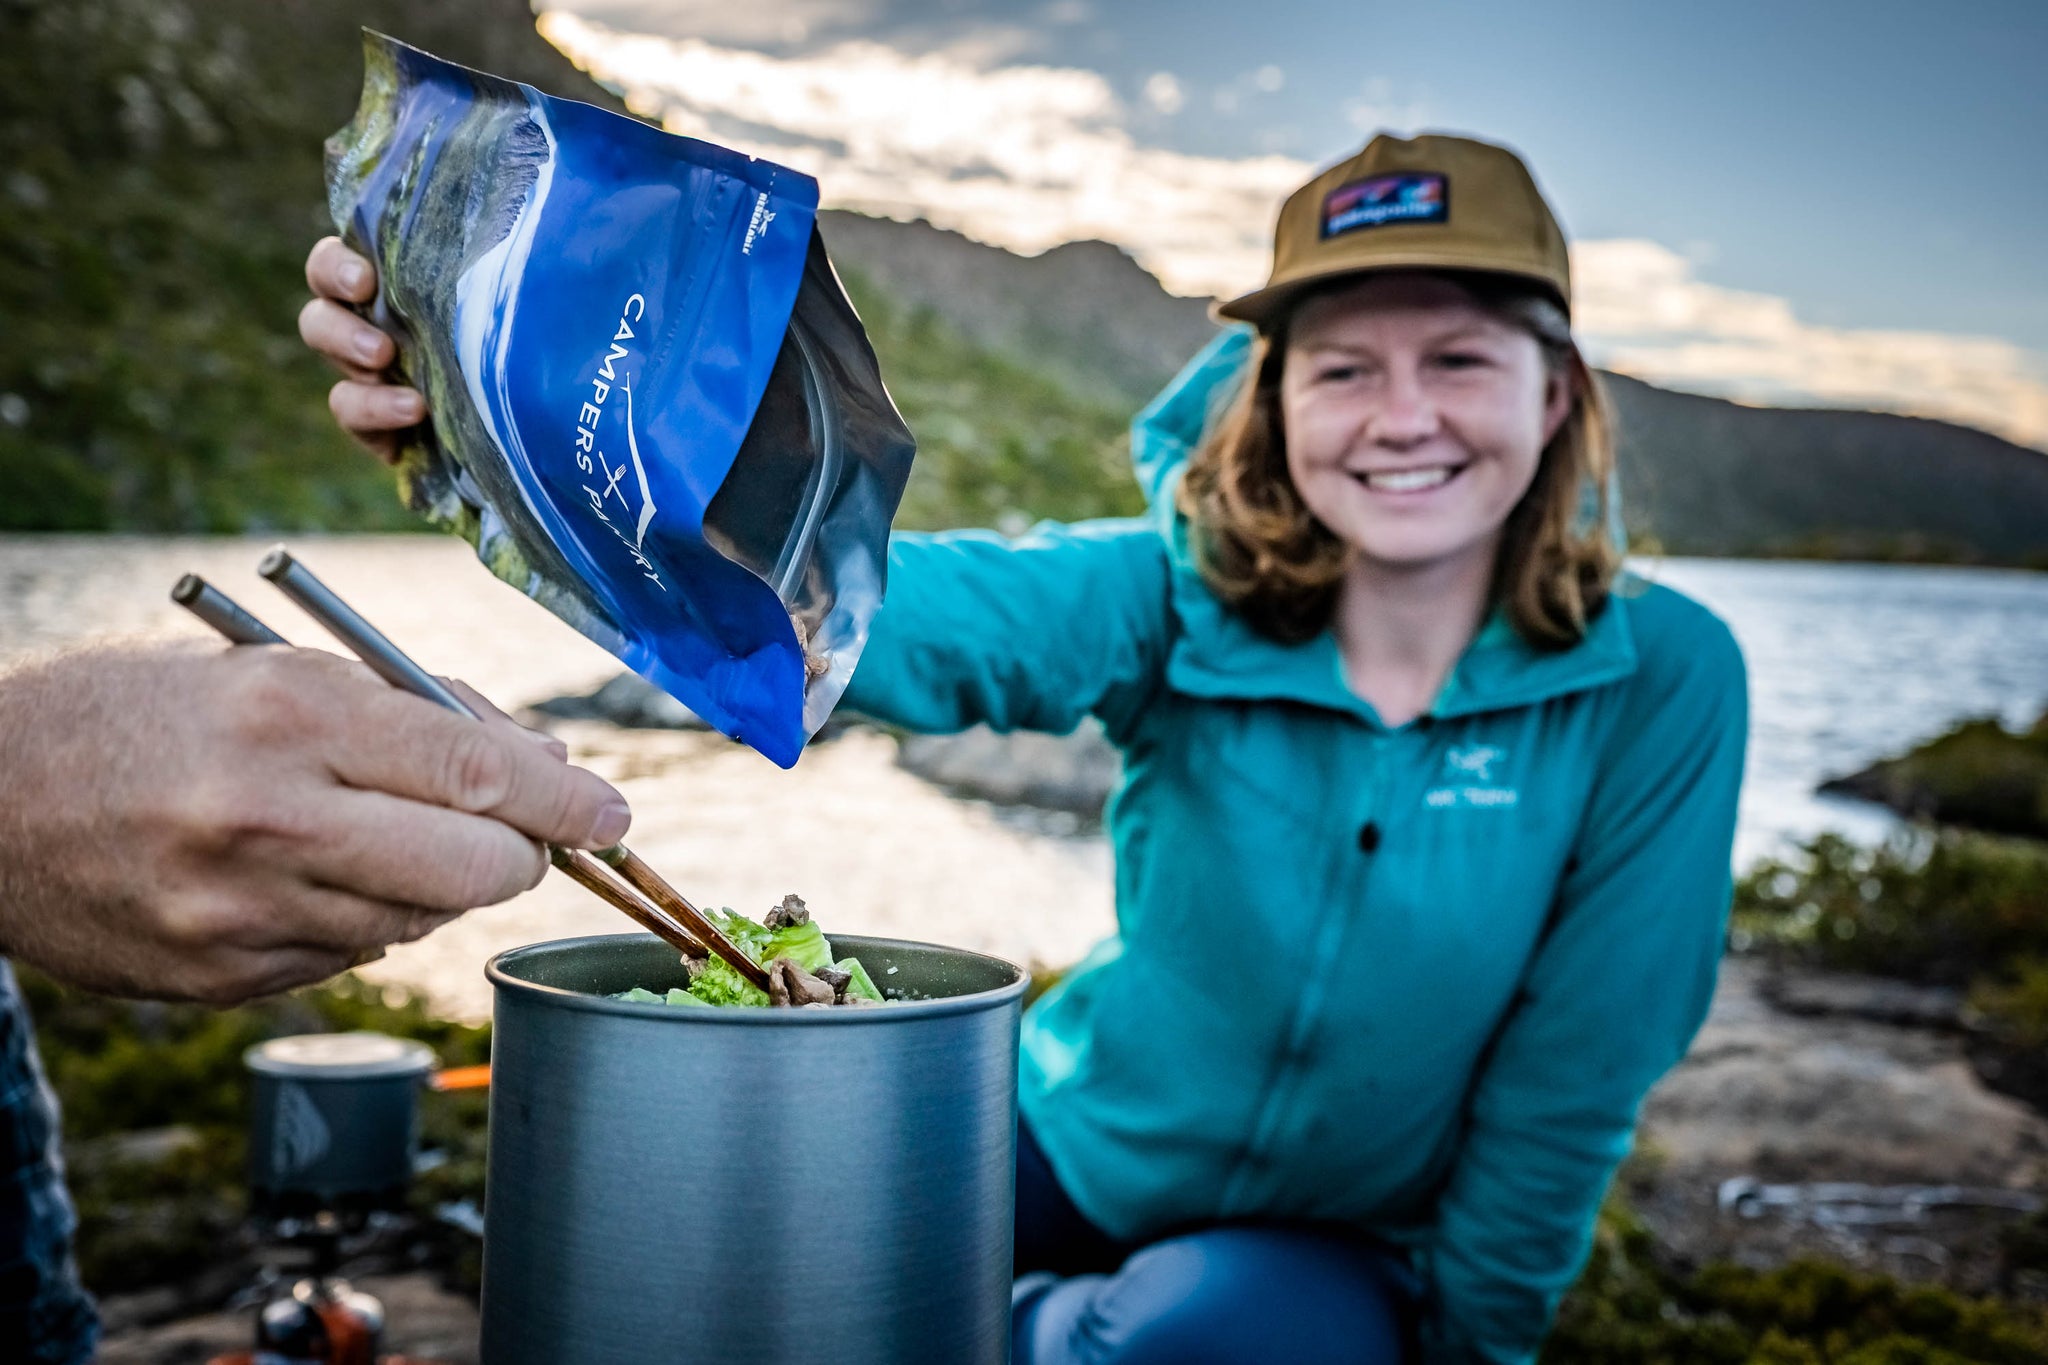 on the trail beef pho was lightweight to carry, super quick to make and a bloody delicious trail meal. Campers Pantry veggies from the pantry range were so good with the crunchy texture and flavour you want to cook this again. Lighter than dehydrated hiking meals and quicker to rehydrate using the jetboil stash so you don't need to carry extra gas.